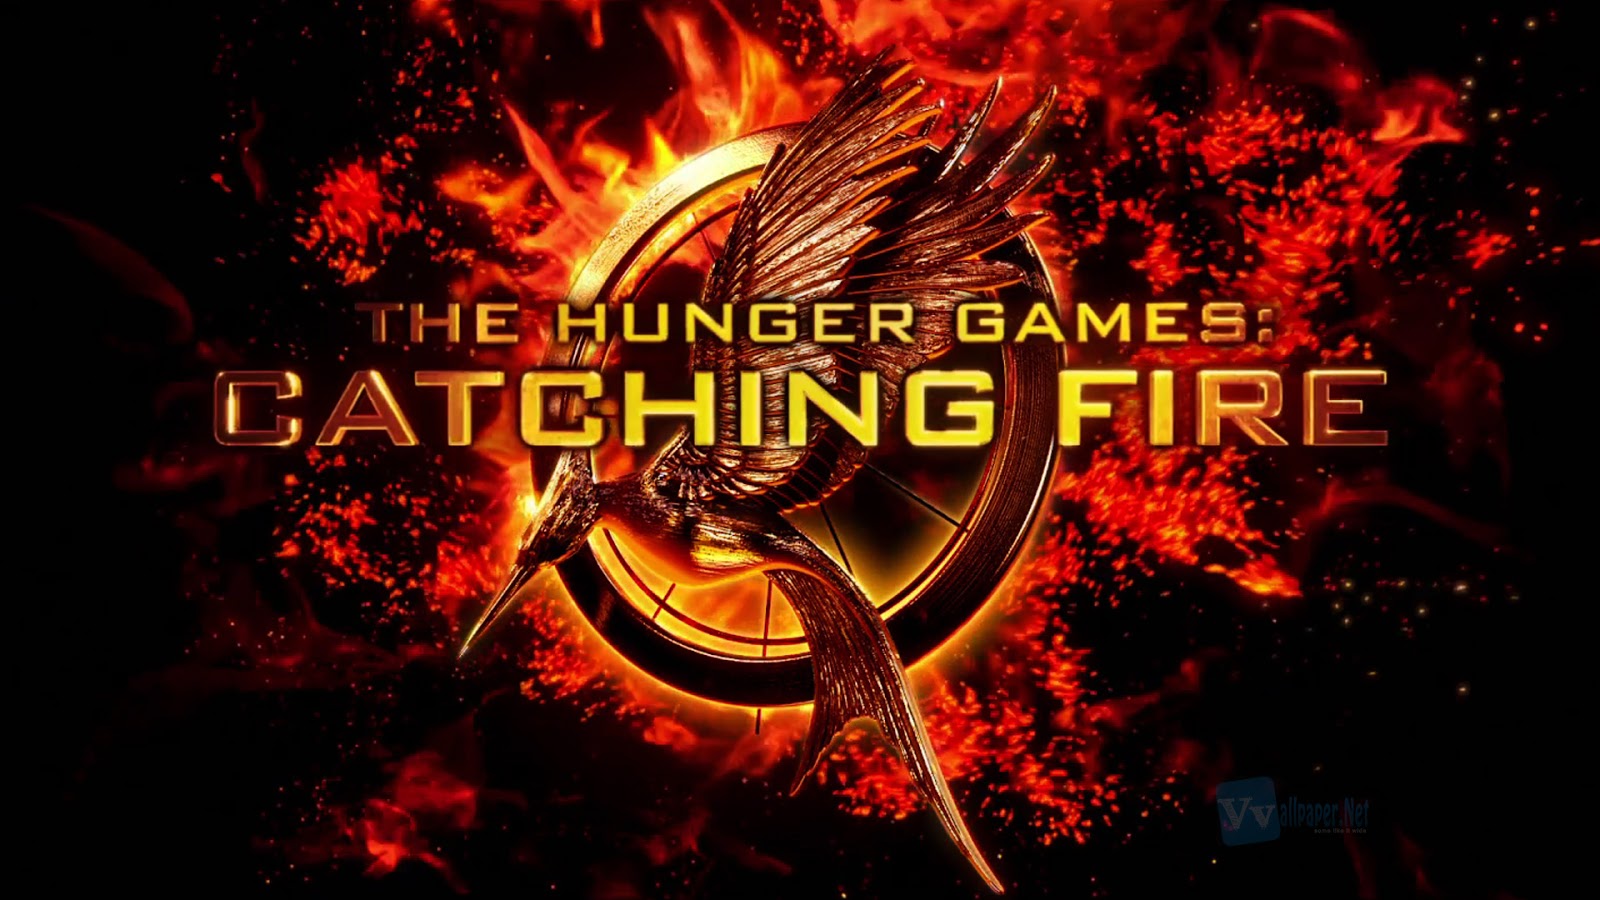 Games Catching Fire HD Wallpaper And Character Posters